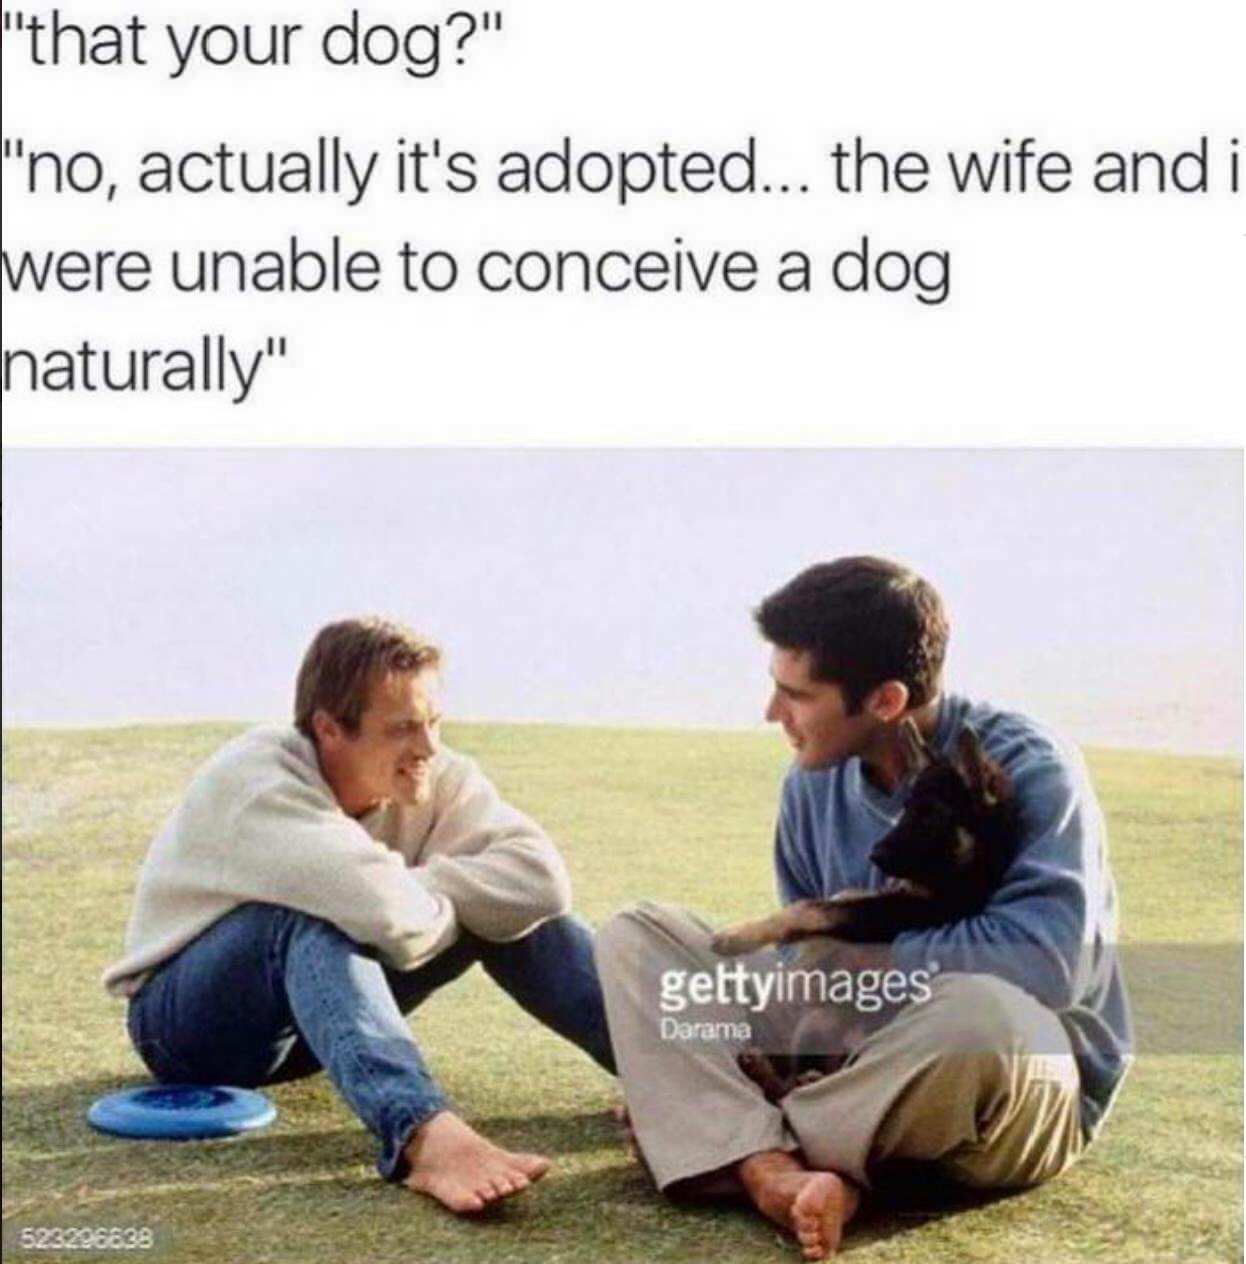 your dog no its adopted - that your dog?" "no, actually it's adopted... the wife and i were unable to conceive a dog naturally" gettyimages Darama 523298638